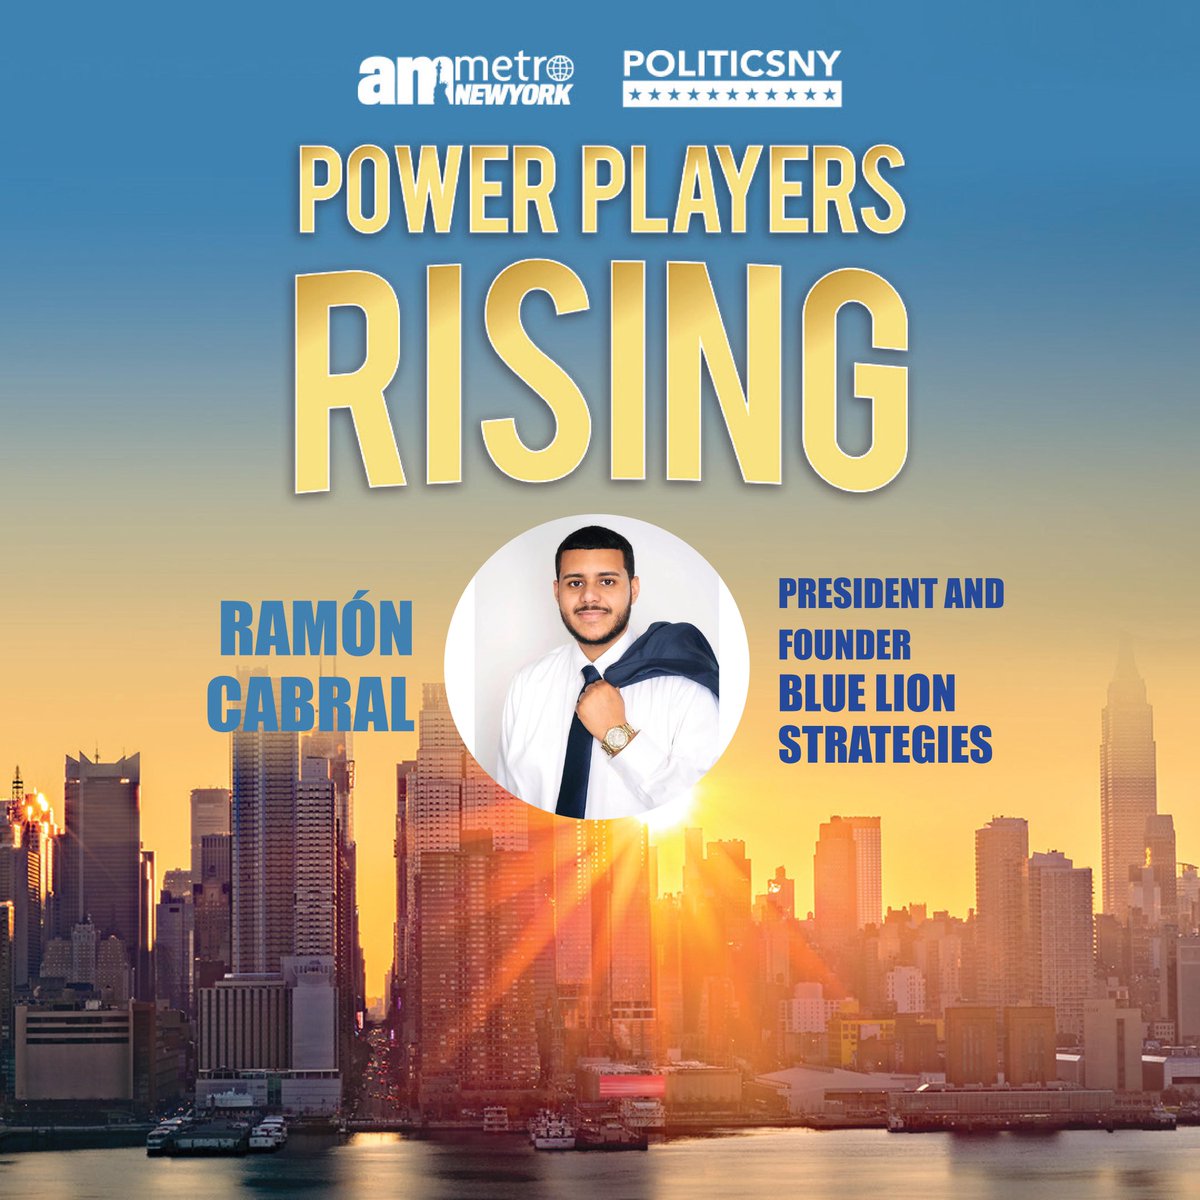 Thank you to @PoliticsNYnews and @amNewYork for the recognition in their Power Players Rising List. It’s an honor to be included amongst so many great folks doing amazing work throughout New York City. #politicsnypp #pnypp #powerlist #amnypp #amnewyorkmetropp